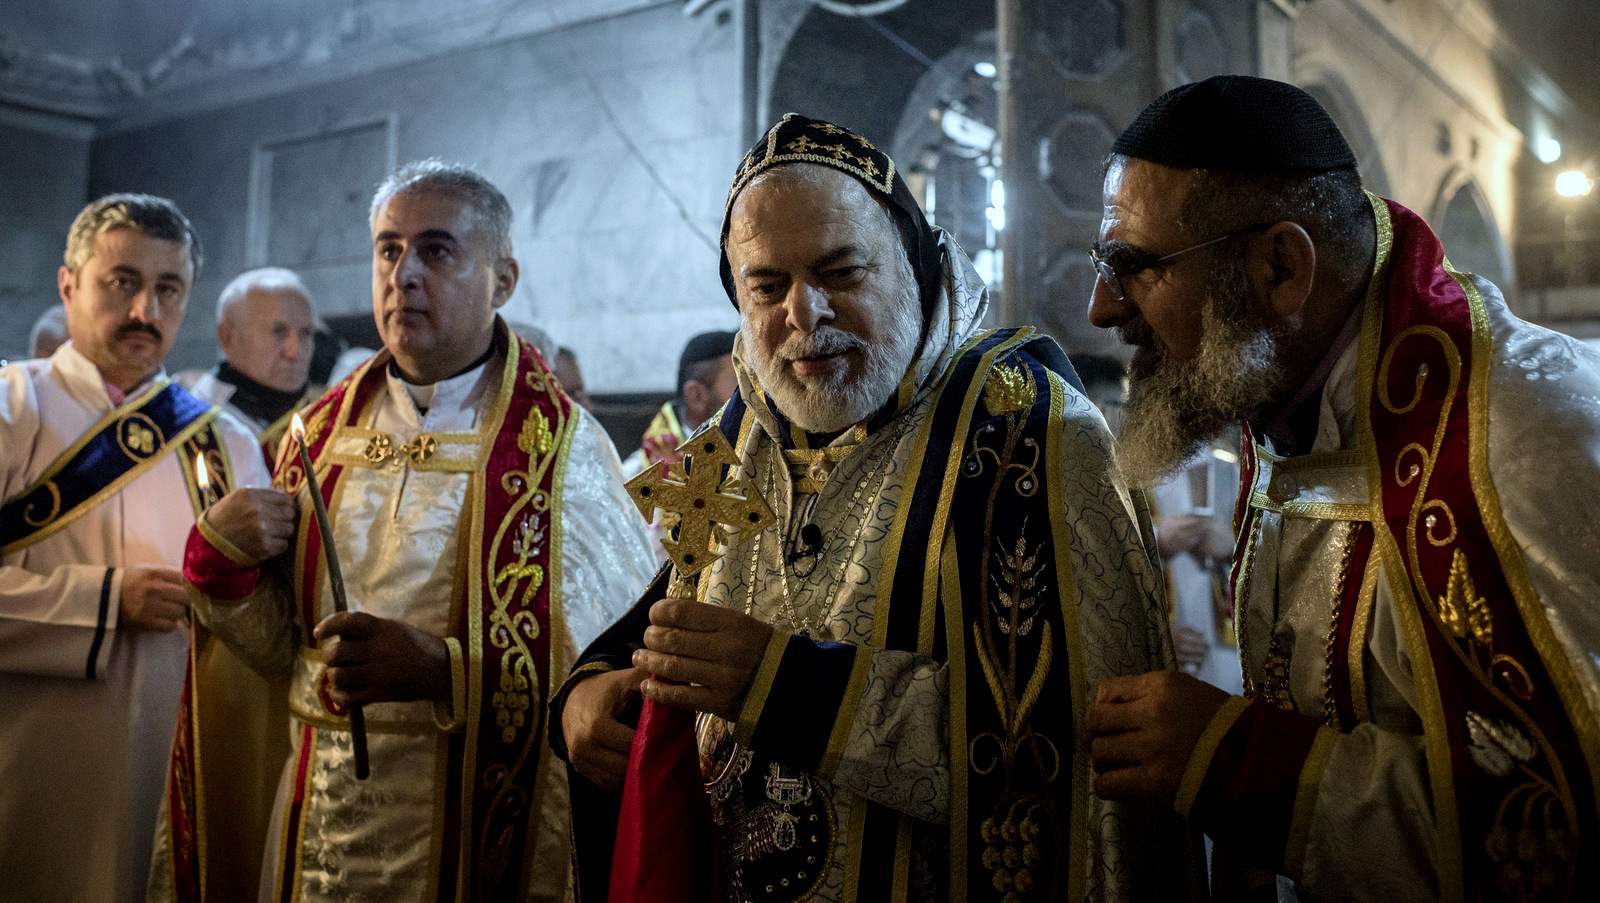 Priests lead a Christmas Eve's Mass in the Assyrian Orthodox church of Mart Shmoni, in Bartella, Iraq, Saturday, December 24, 2016. For the 300 Christians who braved rain and wind to attend the mass in their hometown, the ceremony provided them with as much holiday cheer as grim reminders of the war still raging on around their northern Iraqi town and the distant prospect of moving back home. Displaced when the Islamic State seized their town in 2014, they were bused into the town from Irbil, capital of the self-ruled Kurdish region, where they have lived for more than two years. (AP Photo/Cengiz Yar)